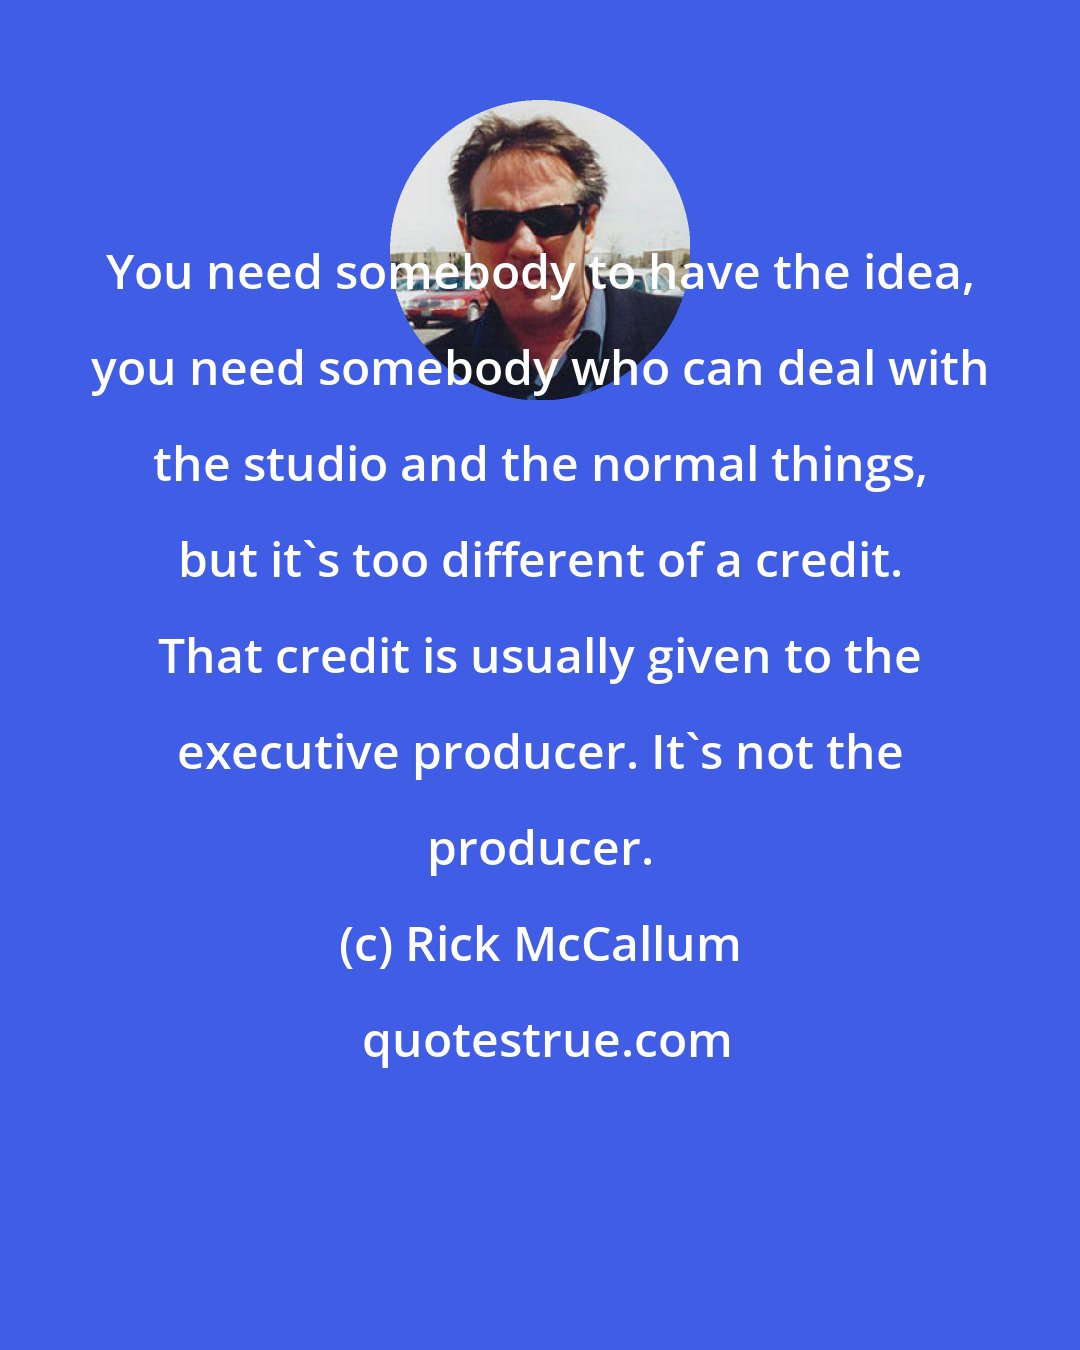 Rick McCallum: You need somebody to have the idea, you need somebody who can deal with the studio and the normal things, but it's too different of a credit. That credit is usually given to the executive producer. It's not the producer.